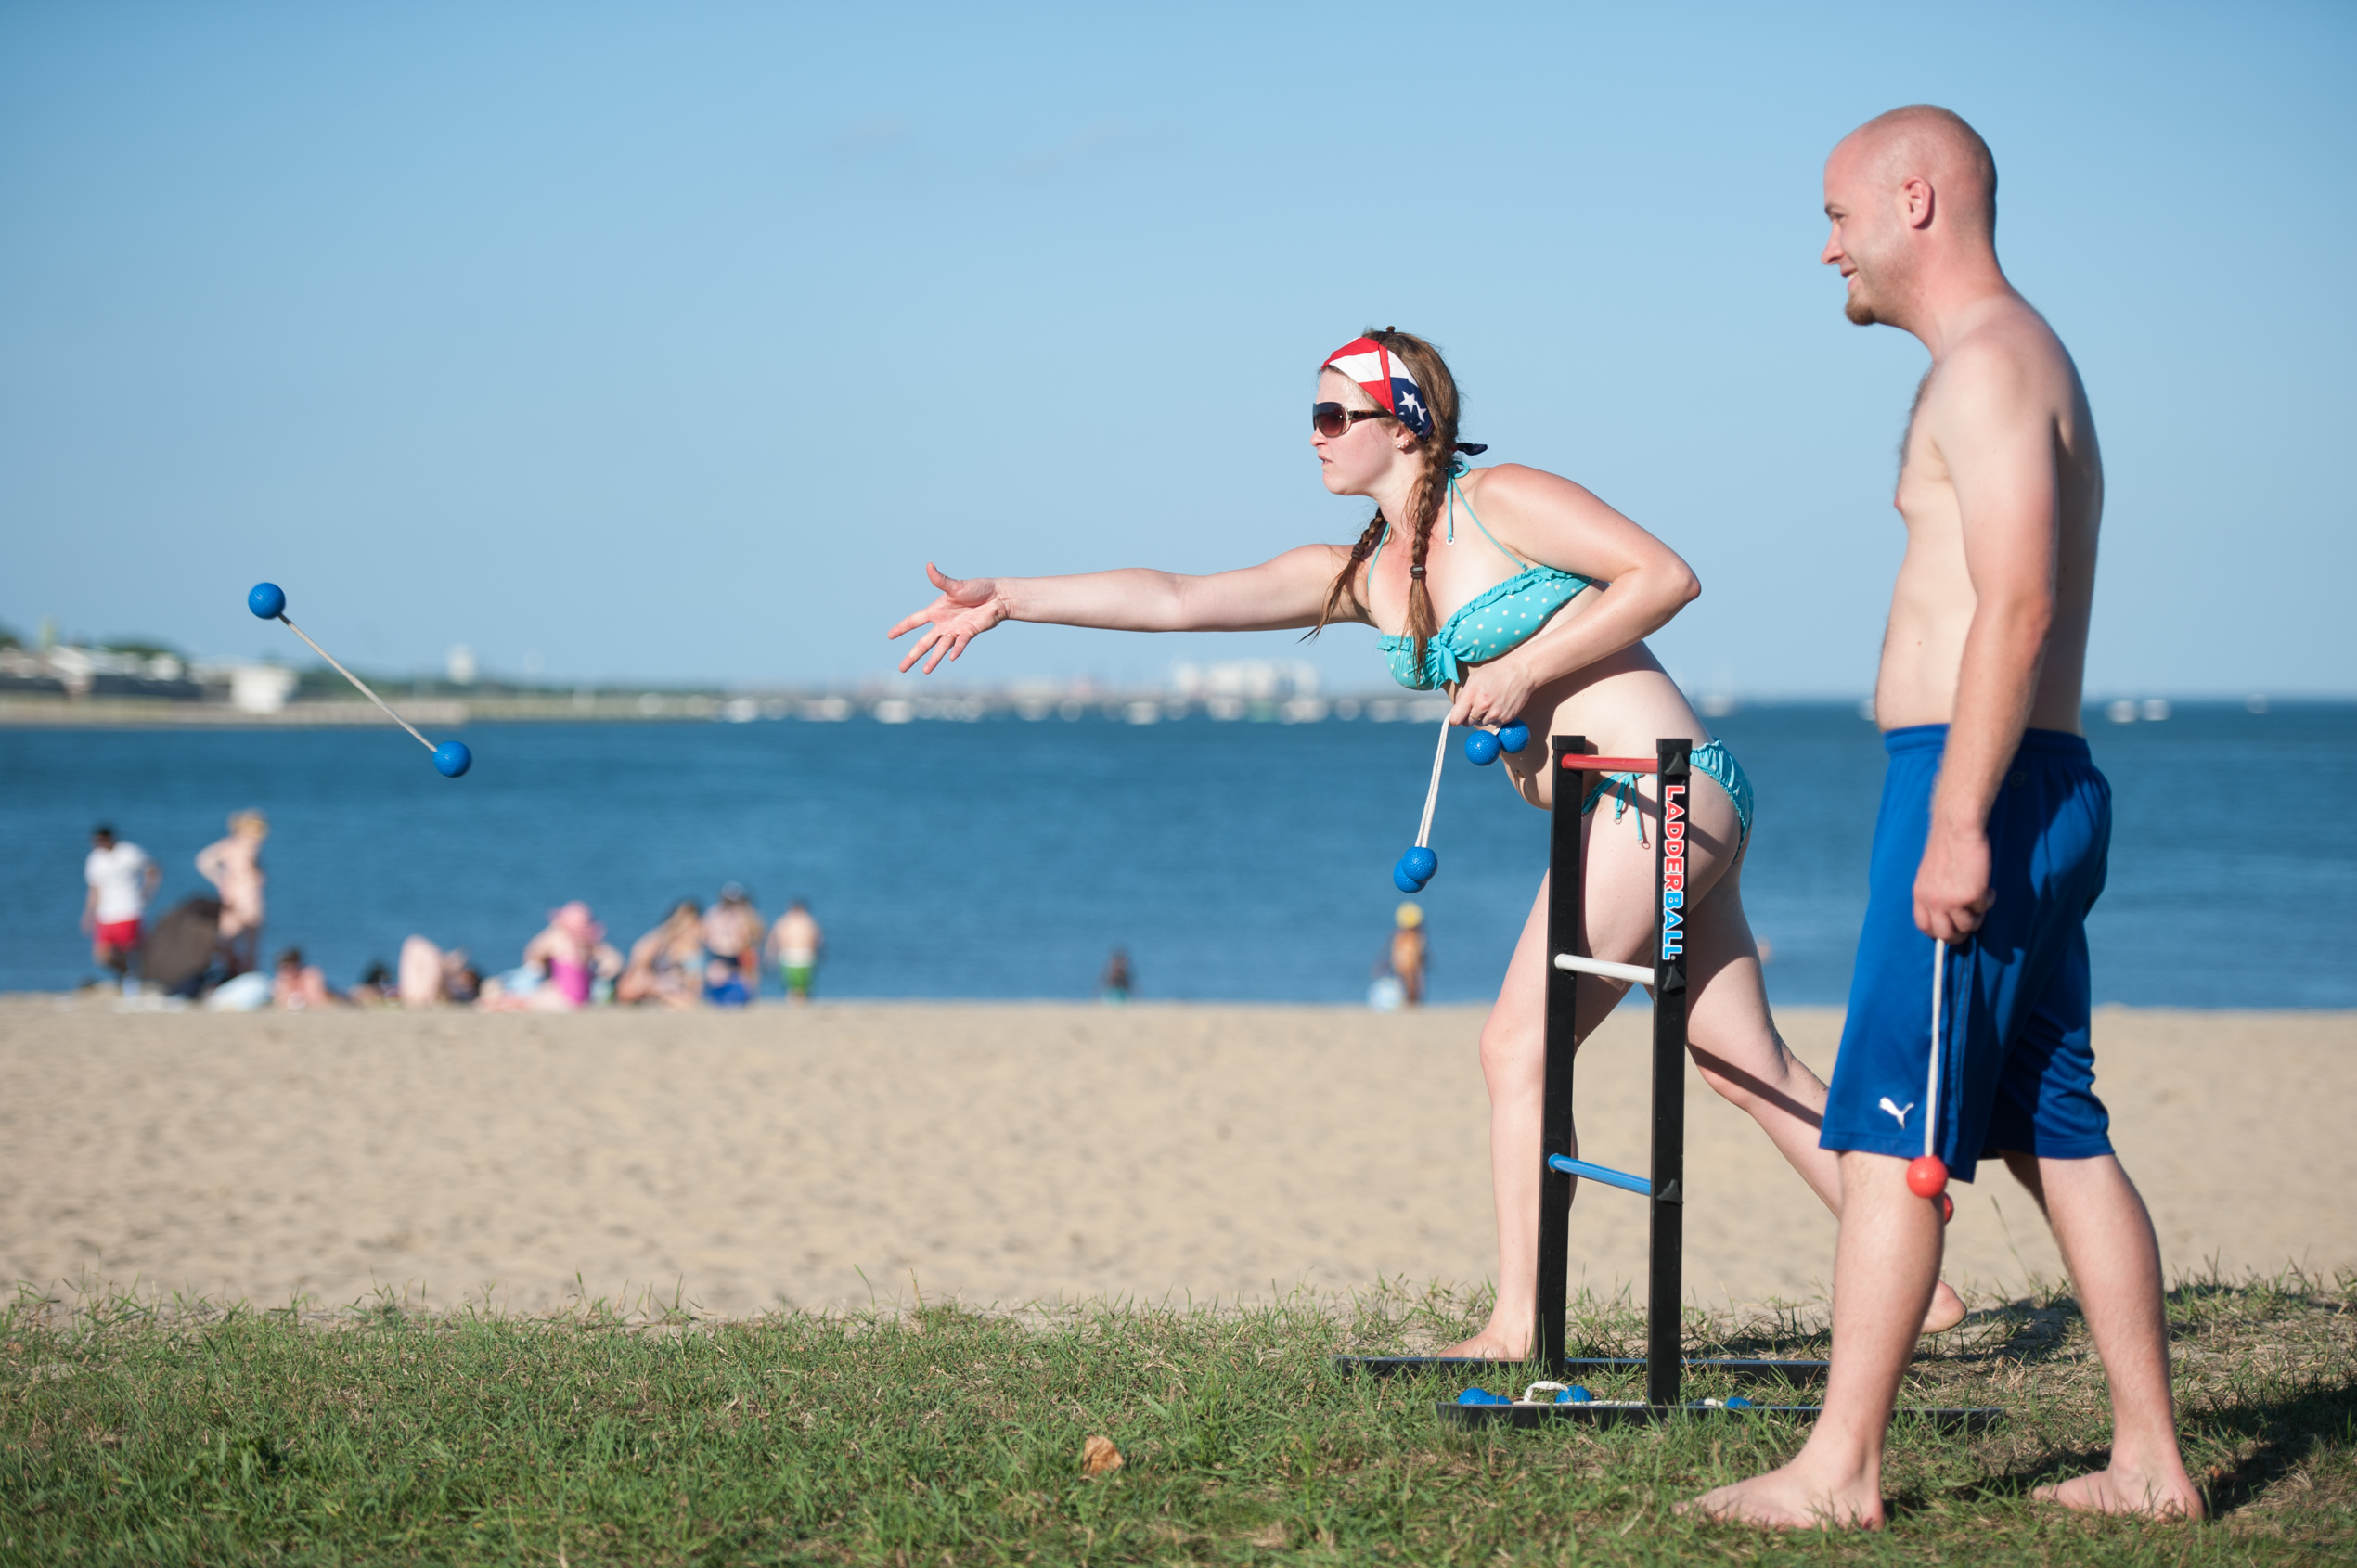 At Carson Beach, in Boston, two beachgoers toss tethered golf balls in a game of Ladderball. The sky is clear, and they’re both wearing swimsuits.